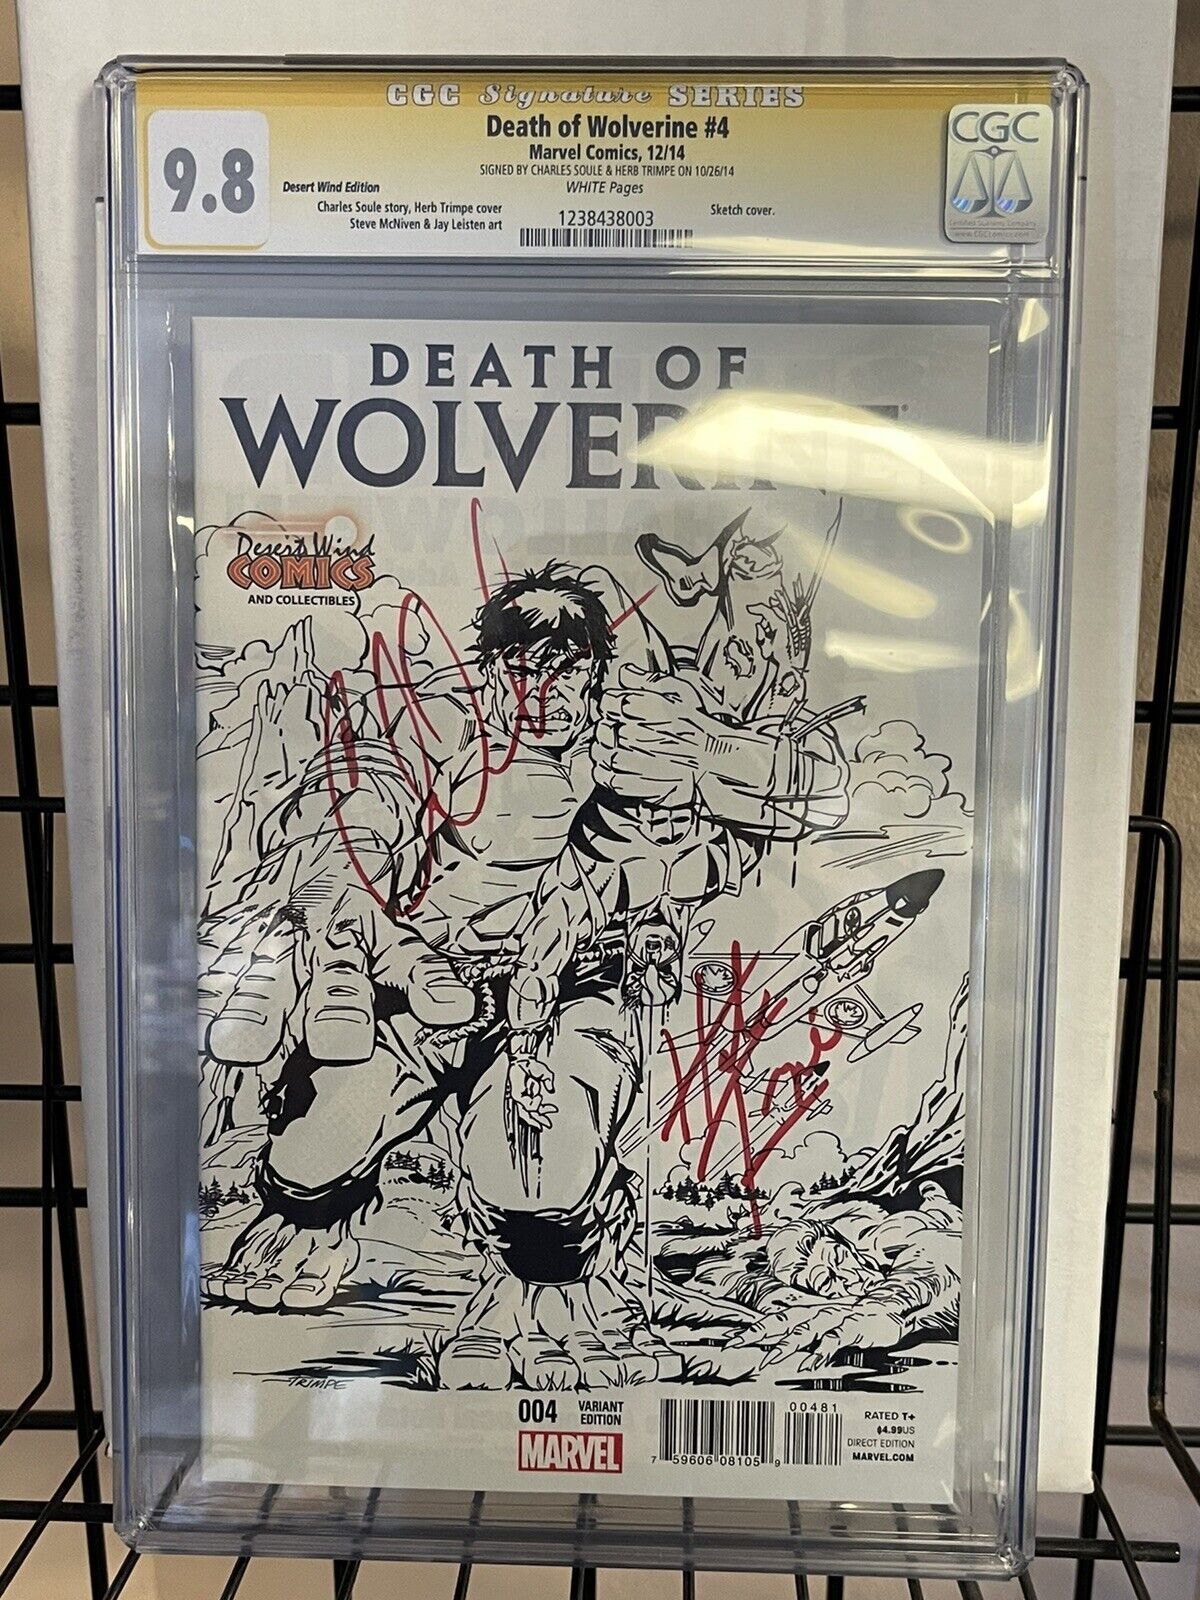 Death of Wolverine 1 Desert Wind Edition CGC 9.8 x2 Signed: Trimpe and Soule